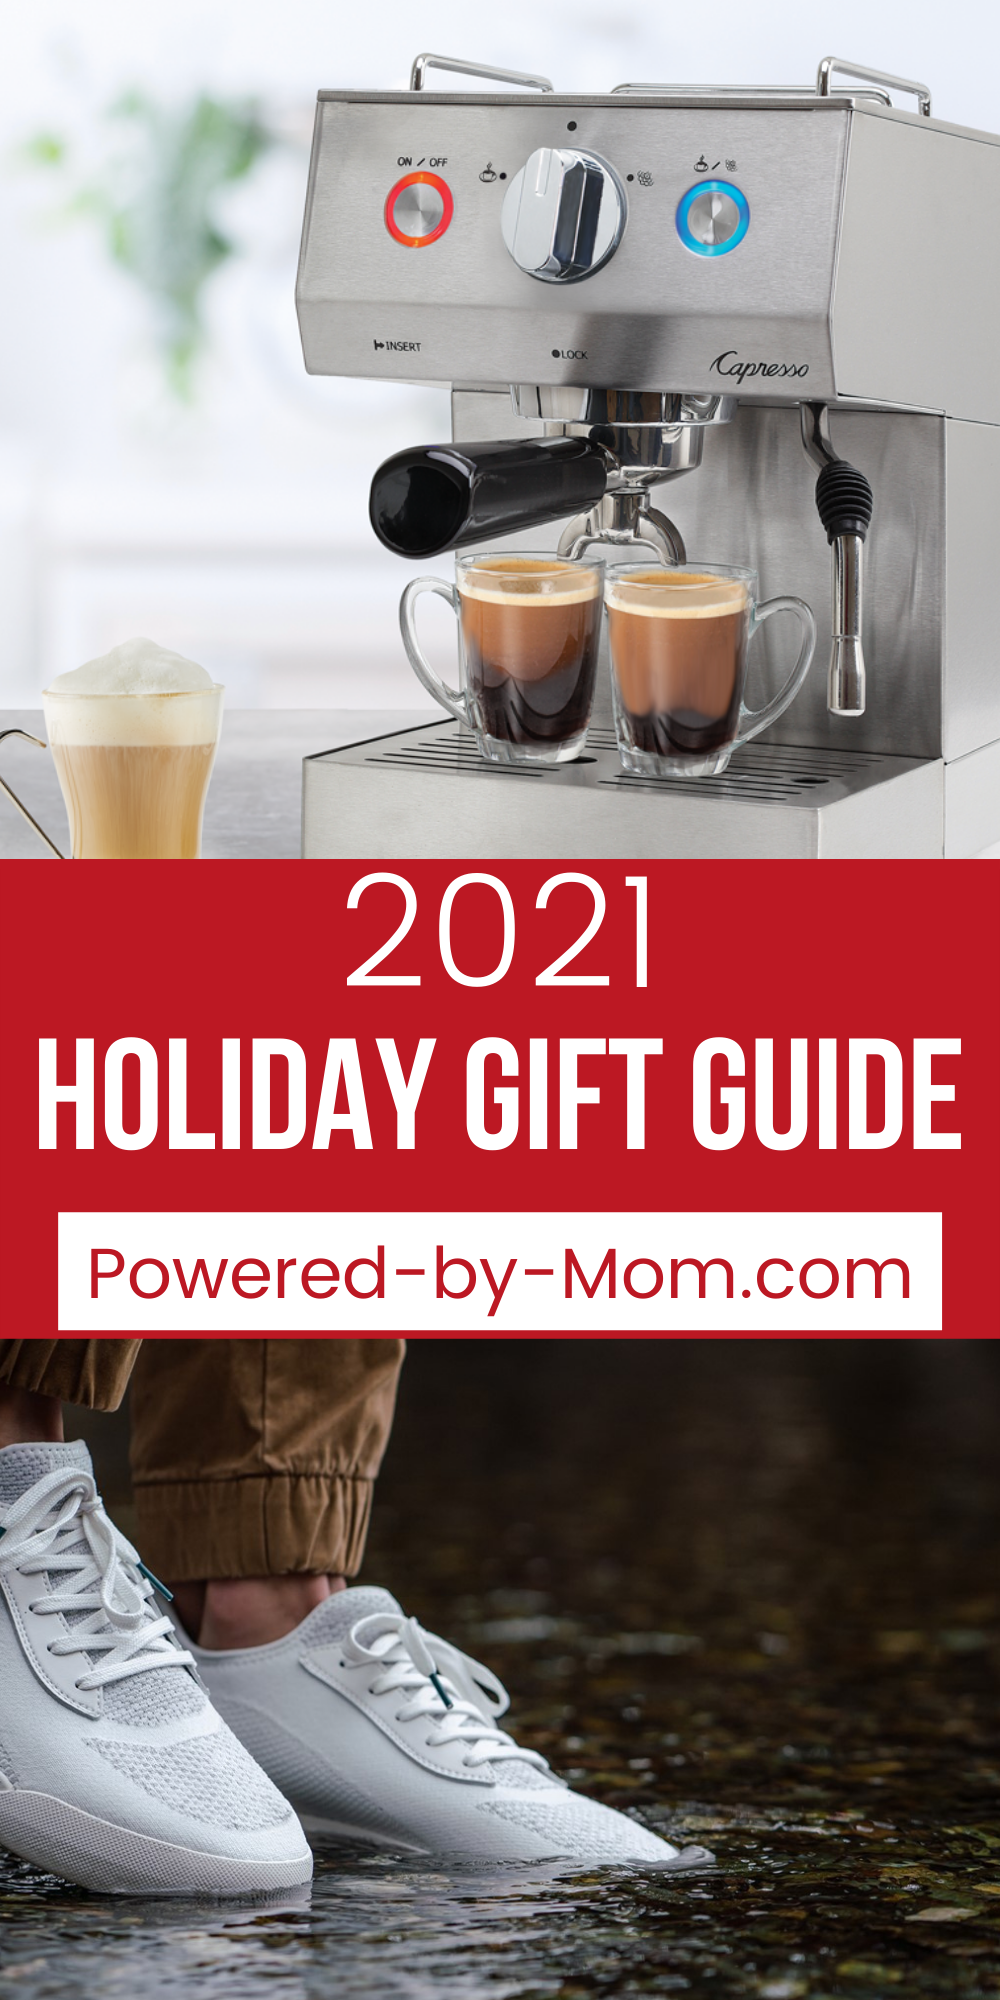 We know it can be hard to figure out what to give to those on your holiday list so we’re here to help with our gift guide.